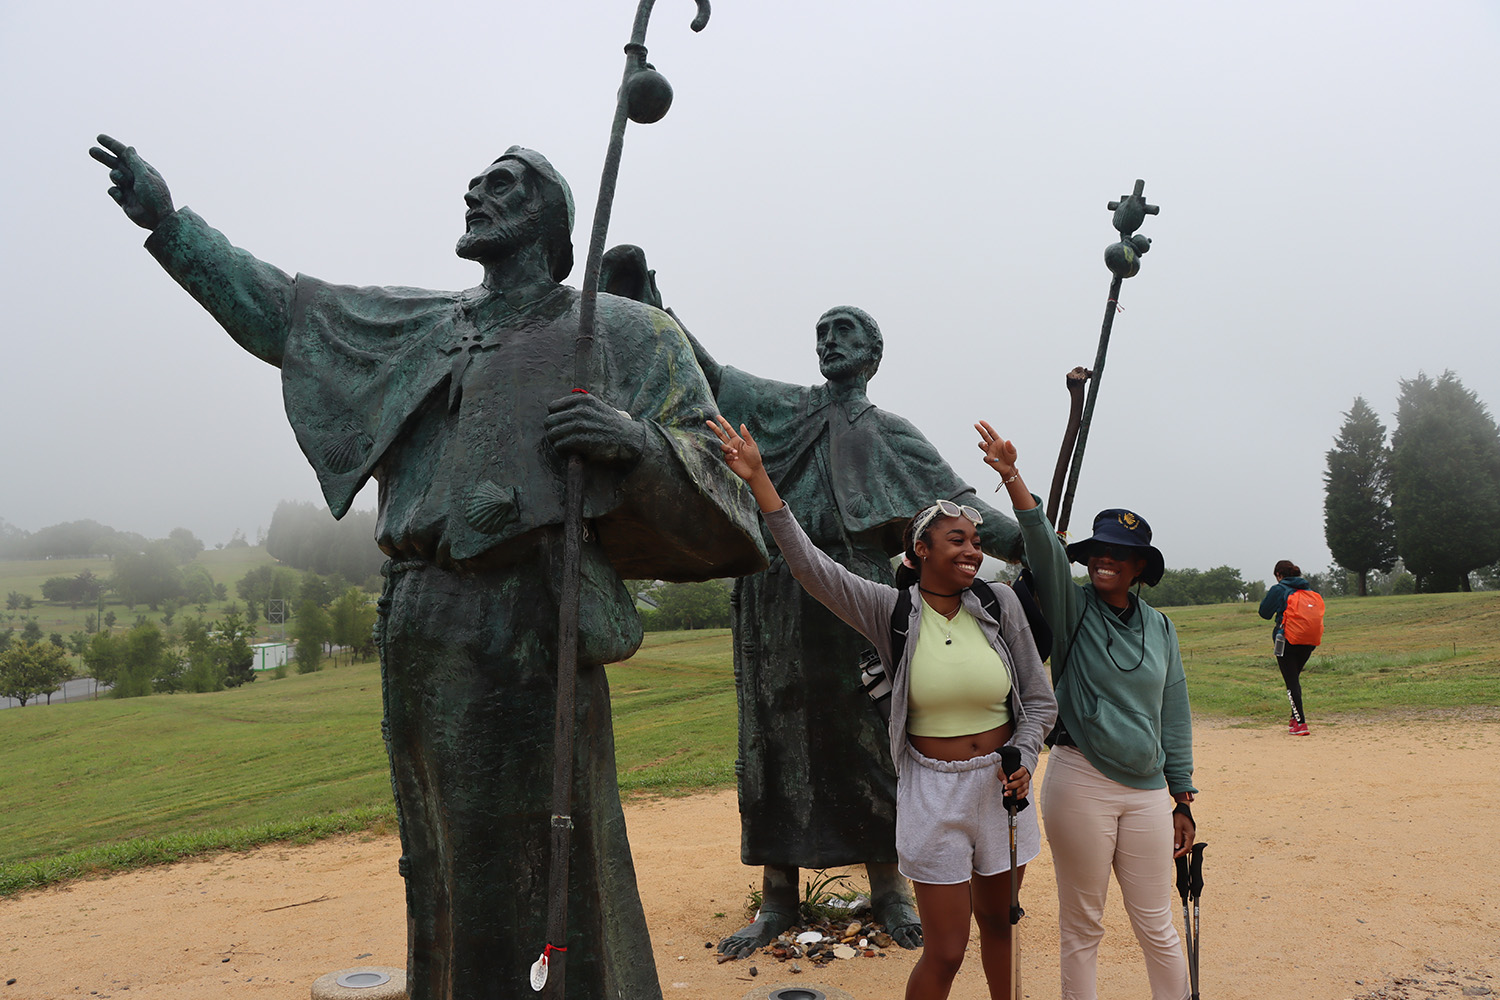 tourists and statues in similar poses